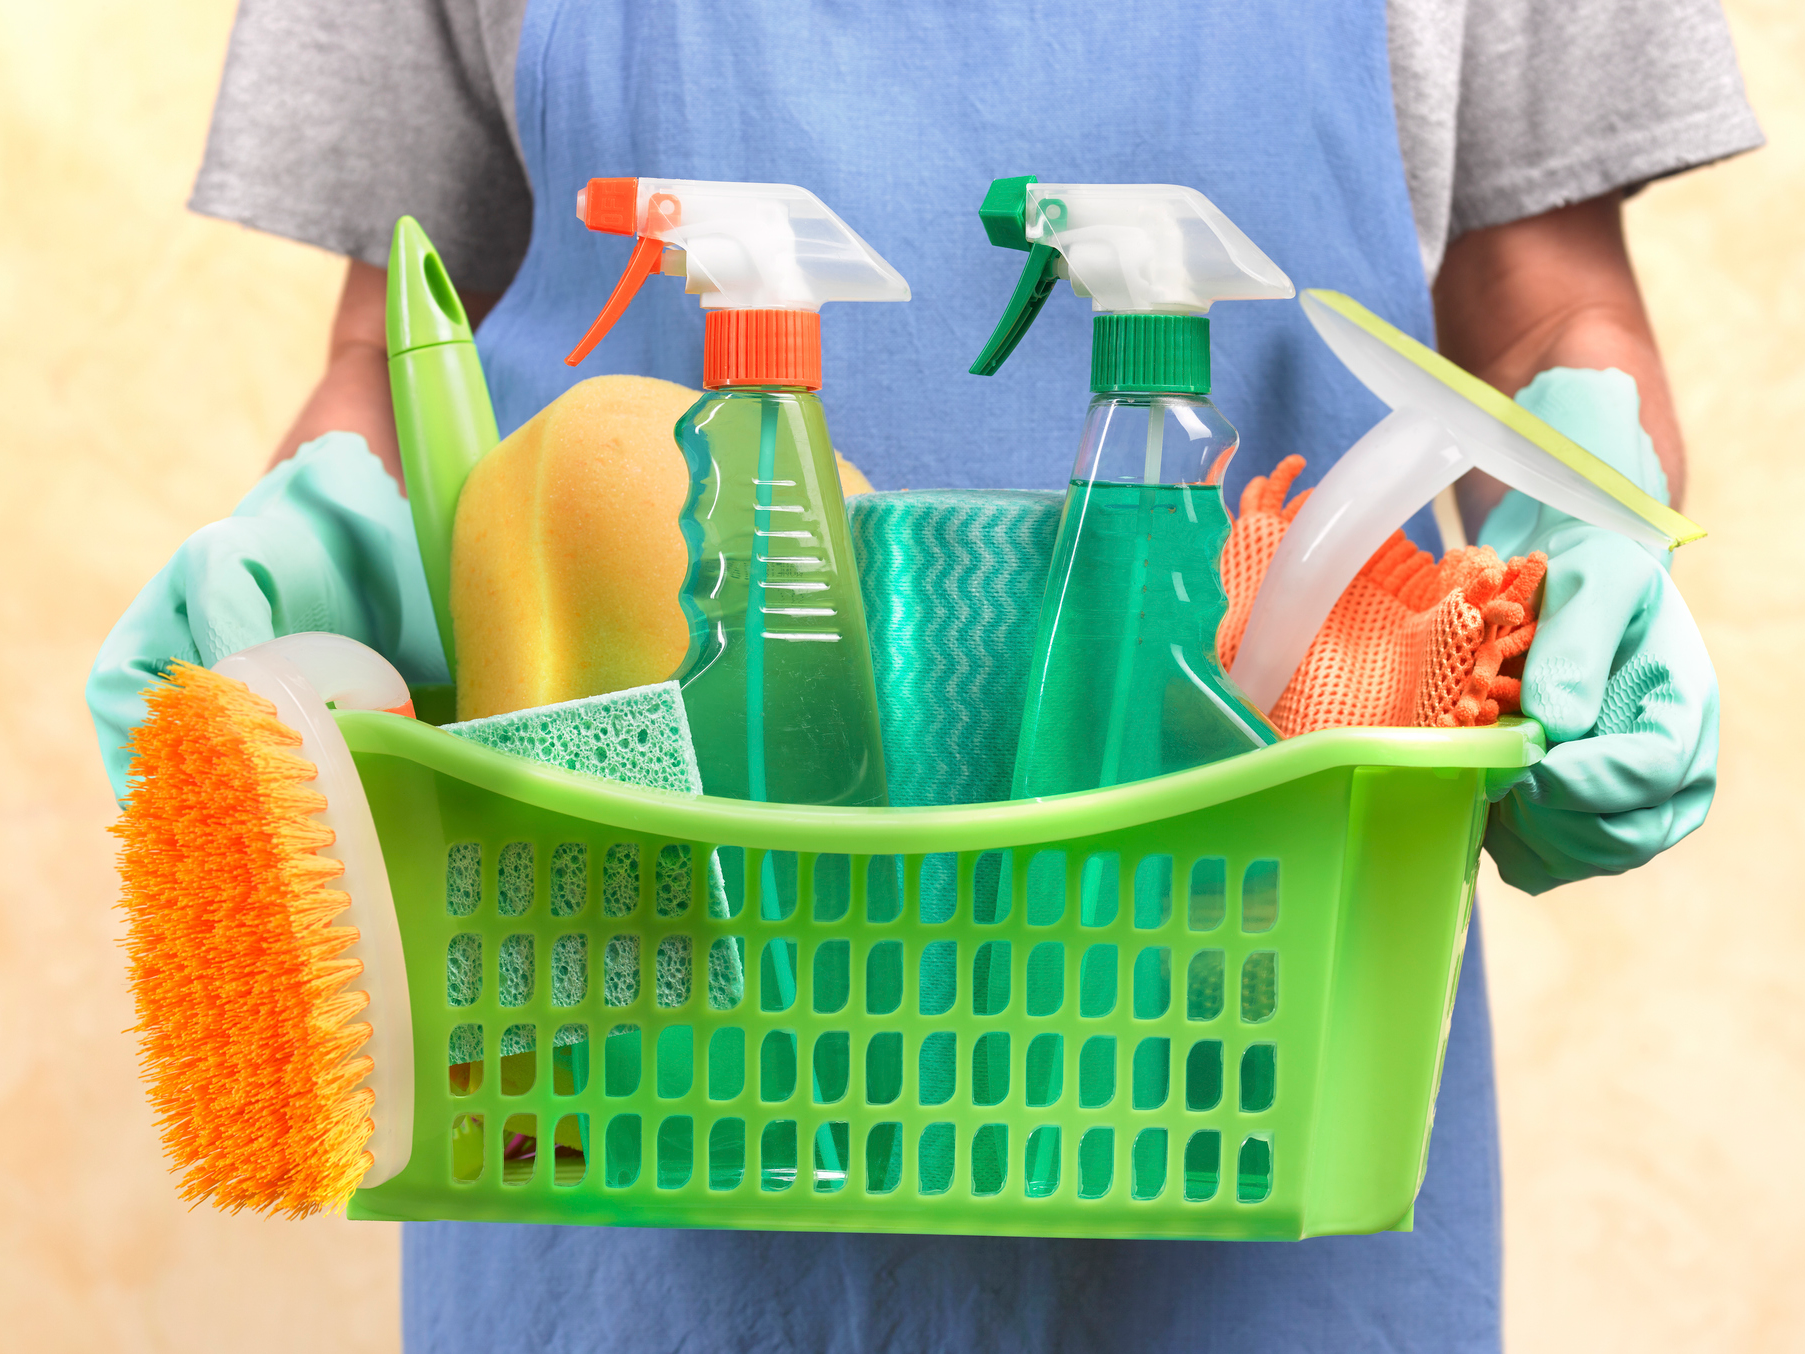 What are the Best Items to Buy When Shopping for Cleaning Supplies